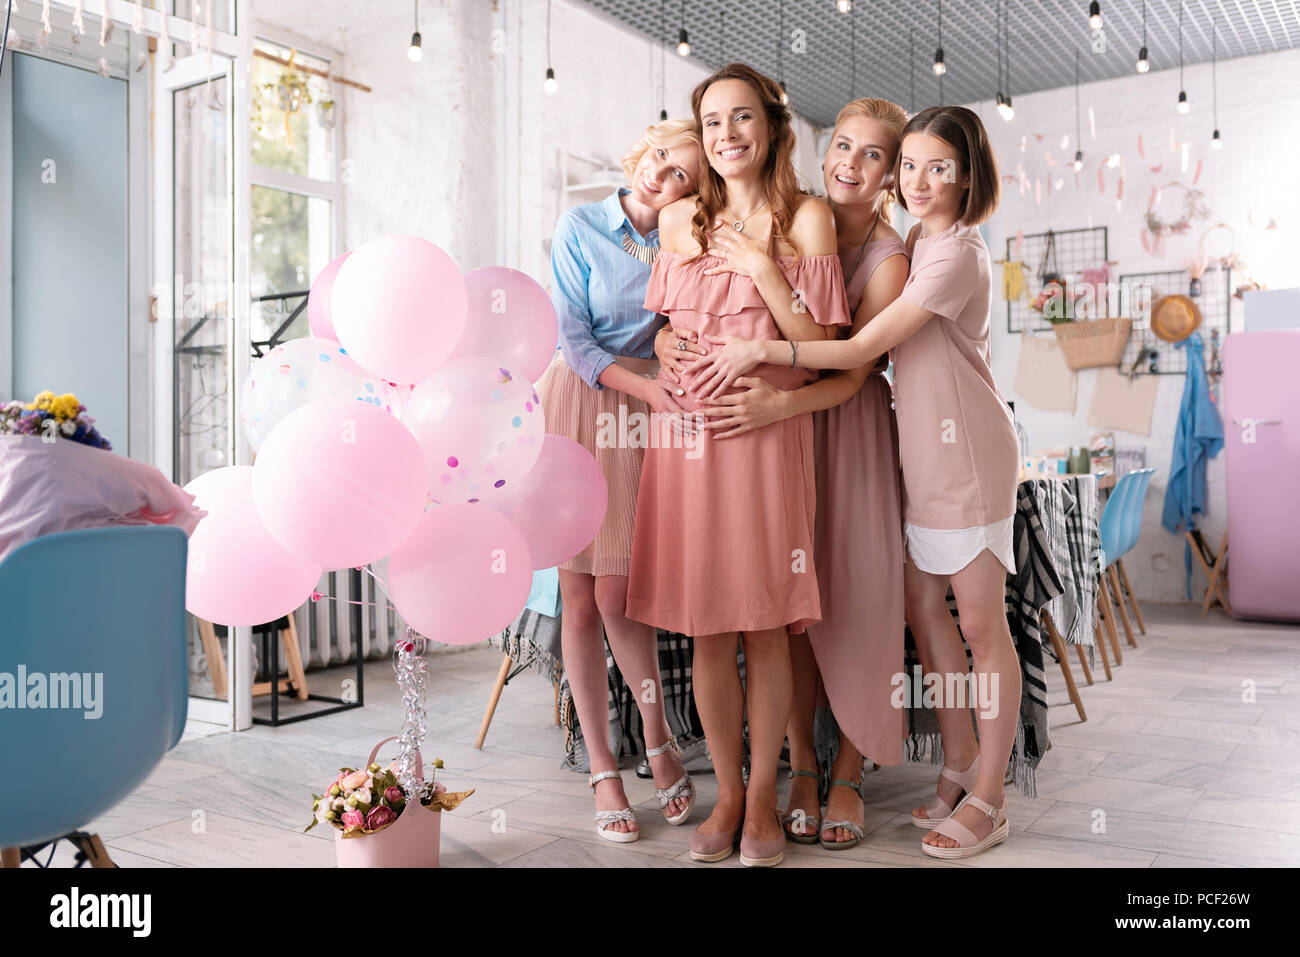 Big family participating in memorable photo session Stock Photo